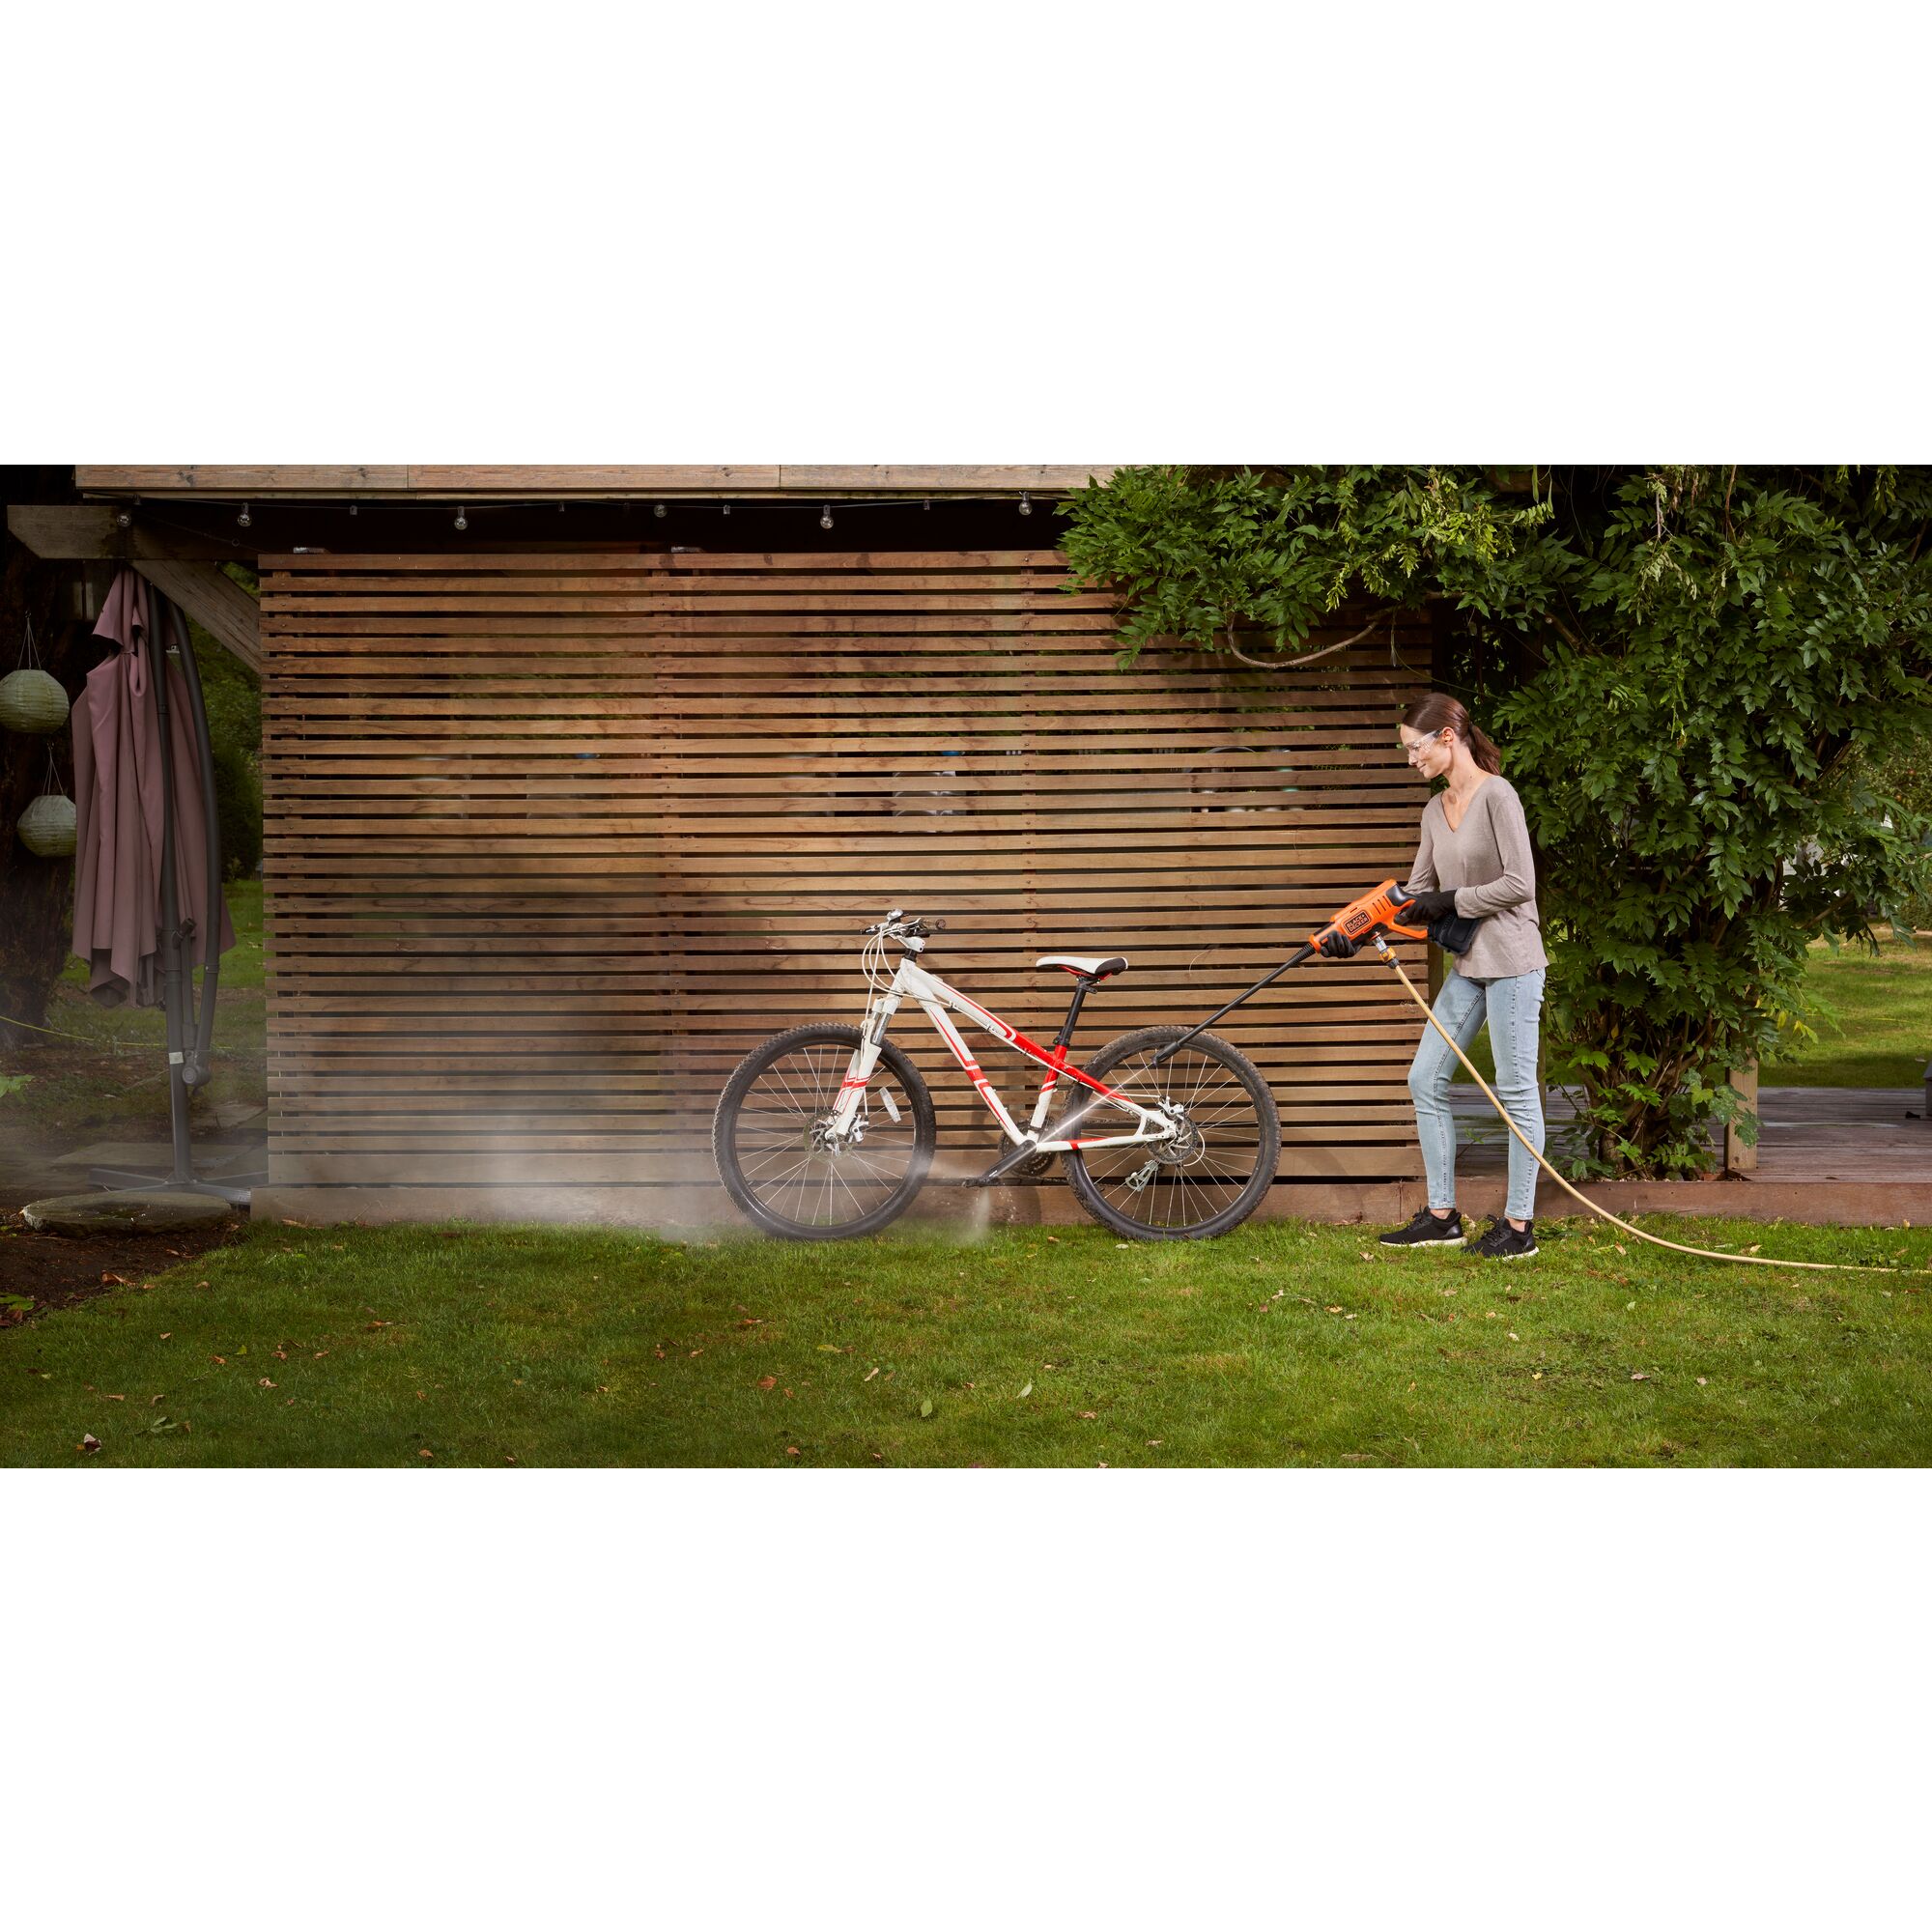 Cordless Power Cleaner Kit being used by person to clean bicycle.